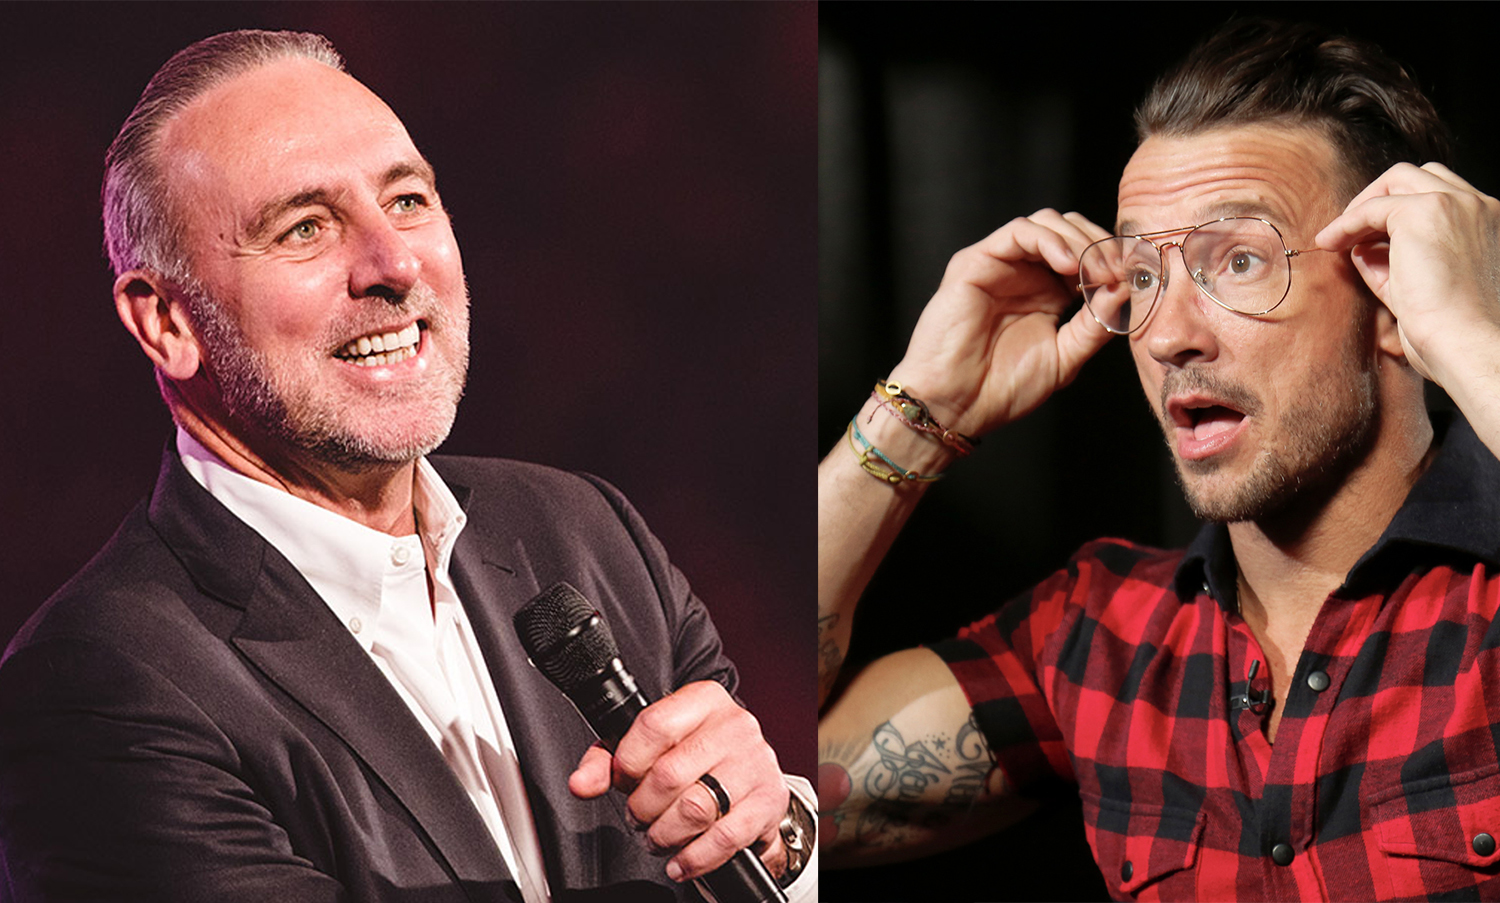 Left: Brian Houston. Image courtesy of hillsong.com. Right: In this October 2017 photo, Carl Lentz, a pastor who ministered to thousands at his Hillsong Church in New York, appears during an interview in New York. (AP Photo/Bebeto Matthews)